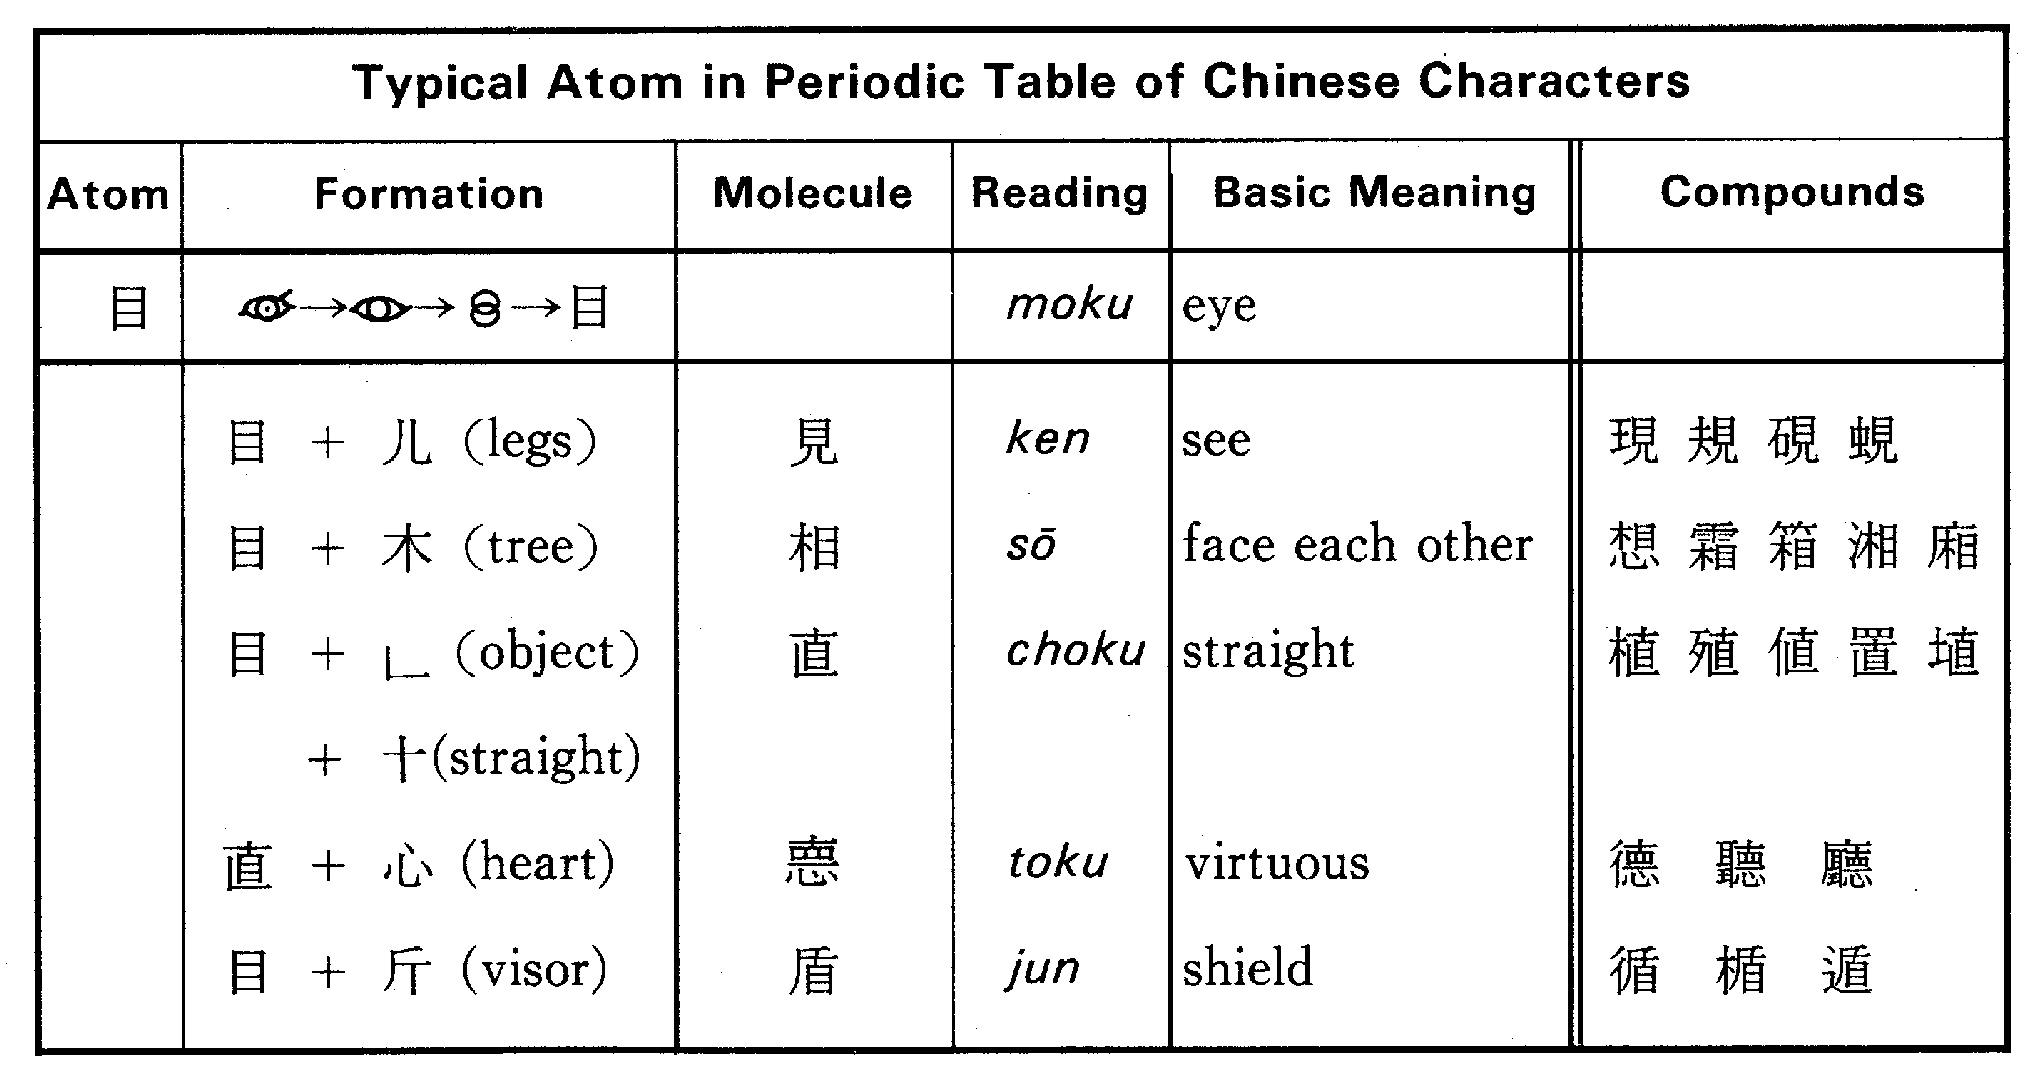 Groups of characters sharing